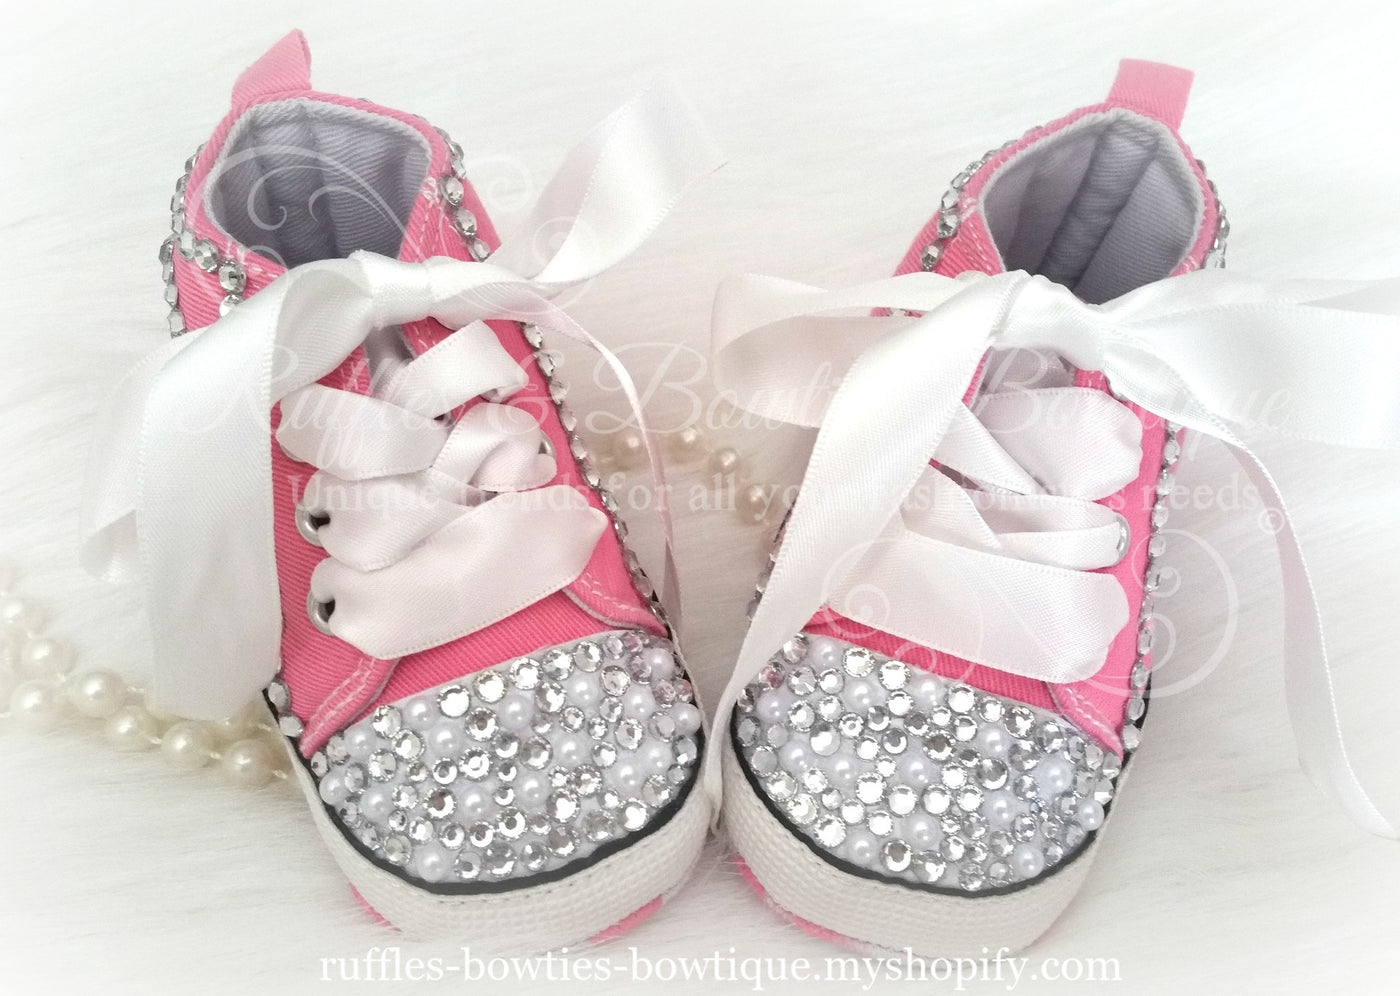 aflange skulder Necklet Crystal & Pearl Baby Converse High Tops - Crystal Shoes - Pre Walker Shoes  - Baby Girl Shoes - Wedding - Christening - Baptism - Baby - Hot Pink |  Ruffles & Bowties Bowtique/ 2127491 ALBERTA LTD